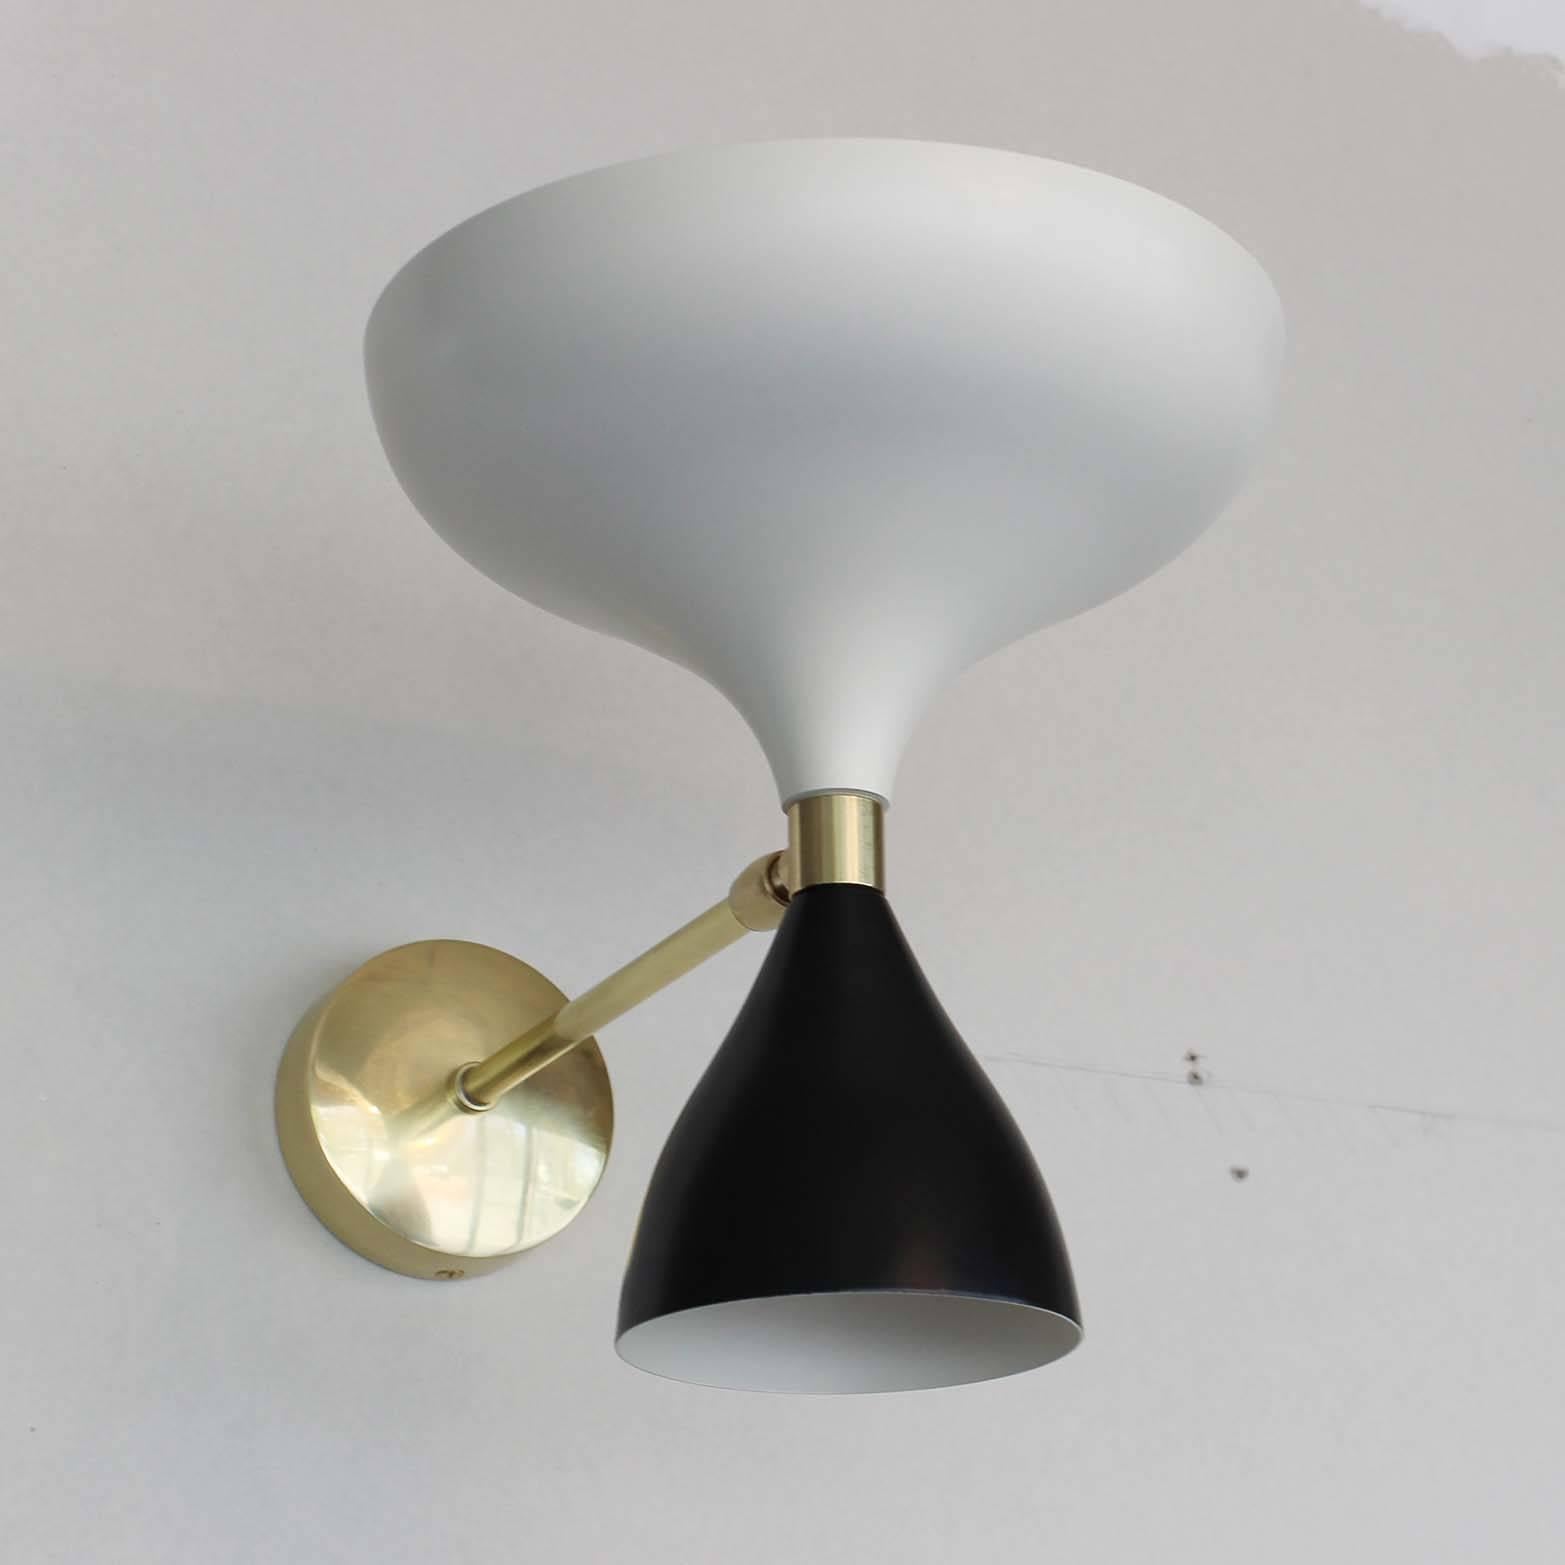 All new spun aluminium sconces in powder coated white or black, or a combination, with brass details. Heads fully rotate with up and down sockets, Stellar Union Exclusive Design. Twelve and six shade chandelier also available, see website and